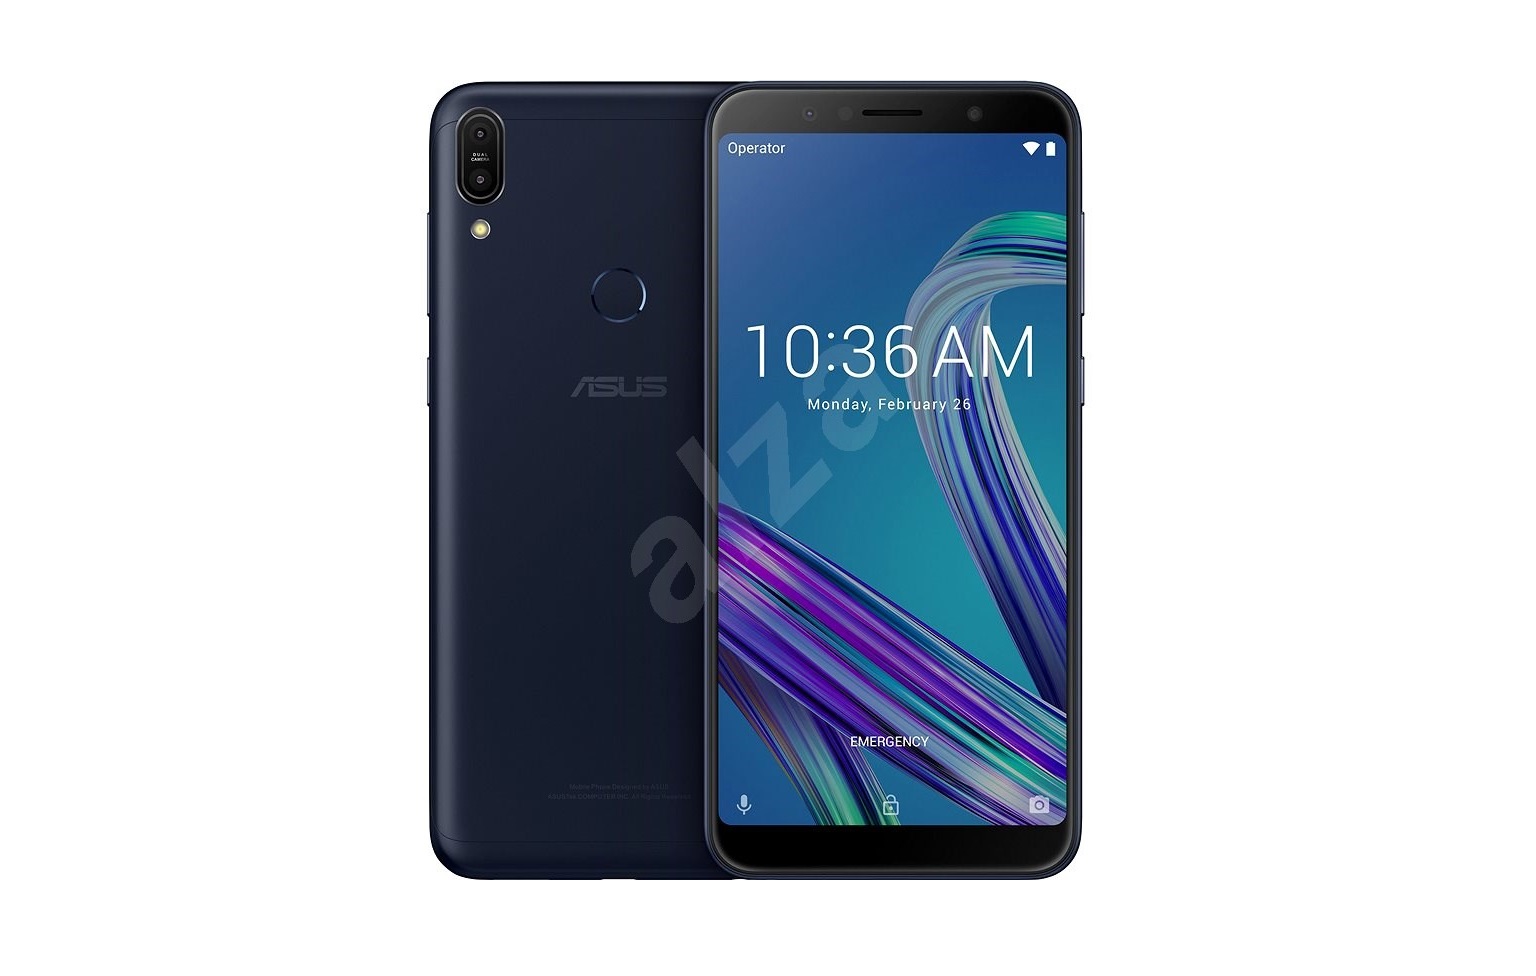 How To Fix Asus Zenfone Max Pro Not Charging [Troubleshooting Guide]